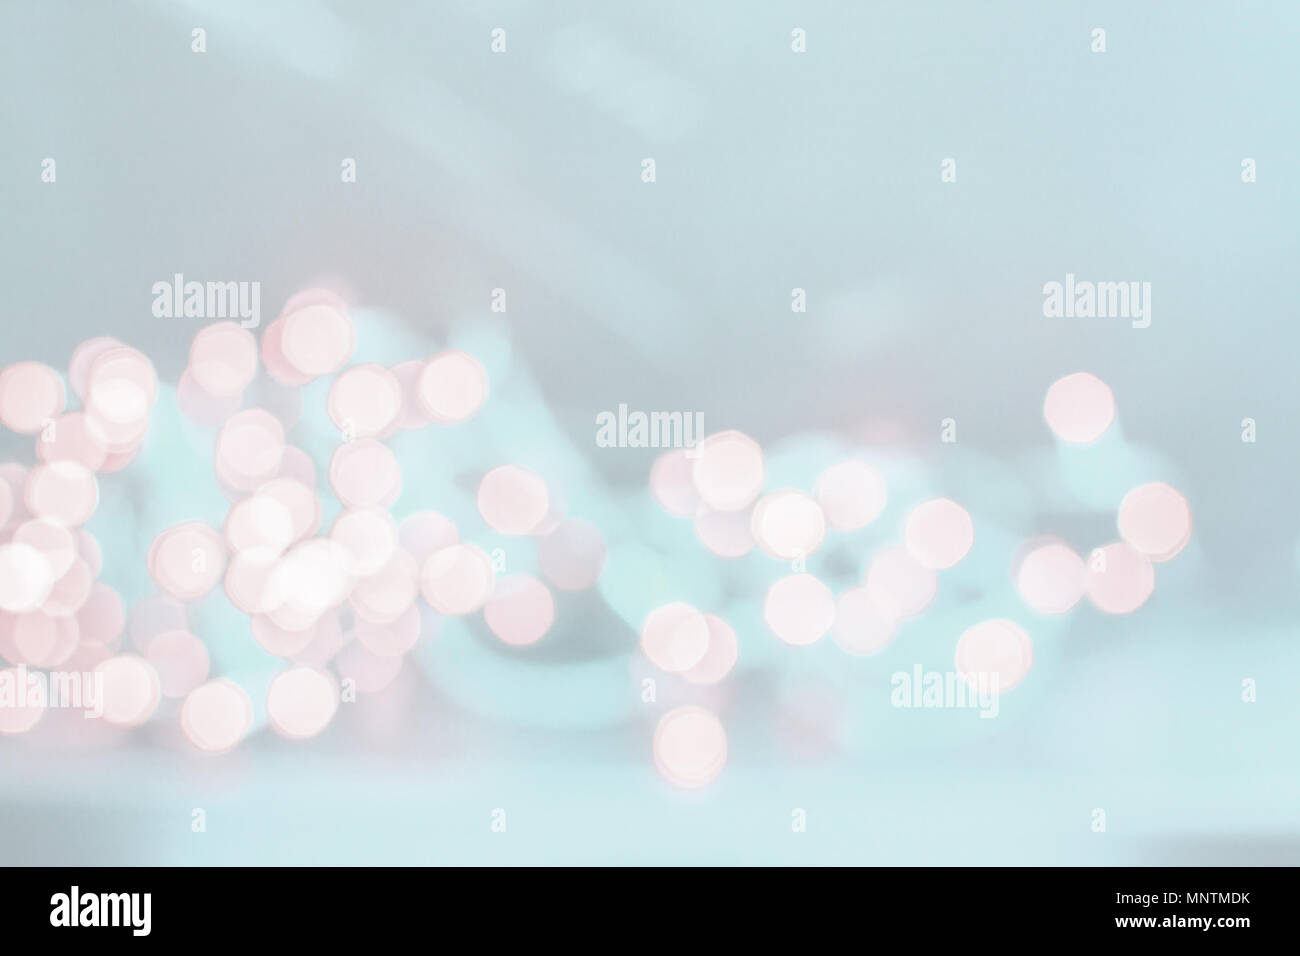 Abstract festive turquoise light background texture Stock Photo